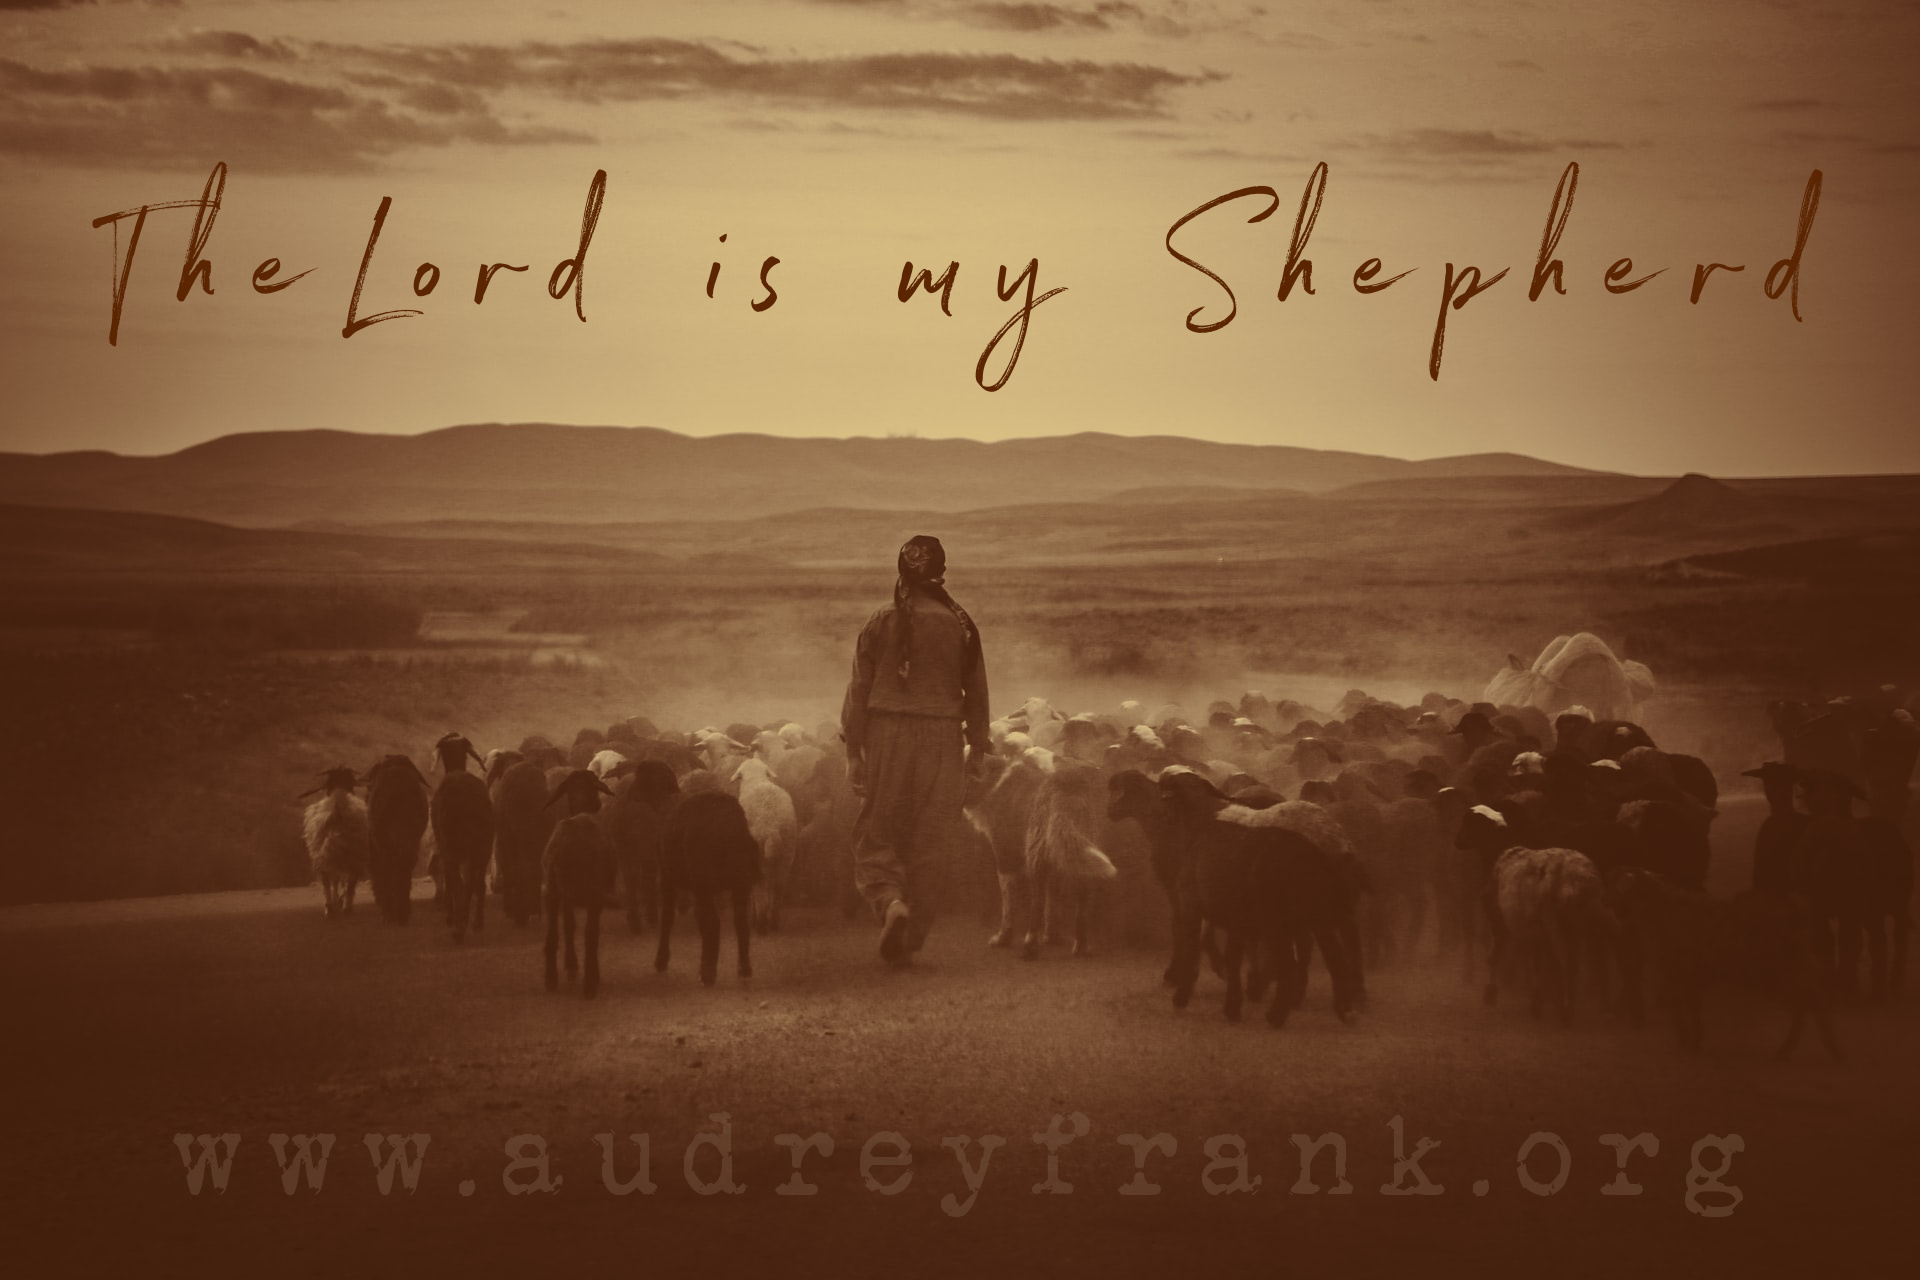 A shepherd herds sheep with the words The Lord is my Shepherd describing the subject of the post.